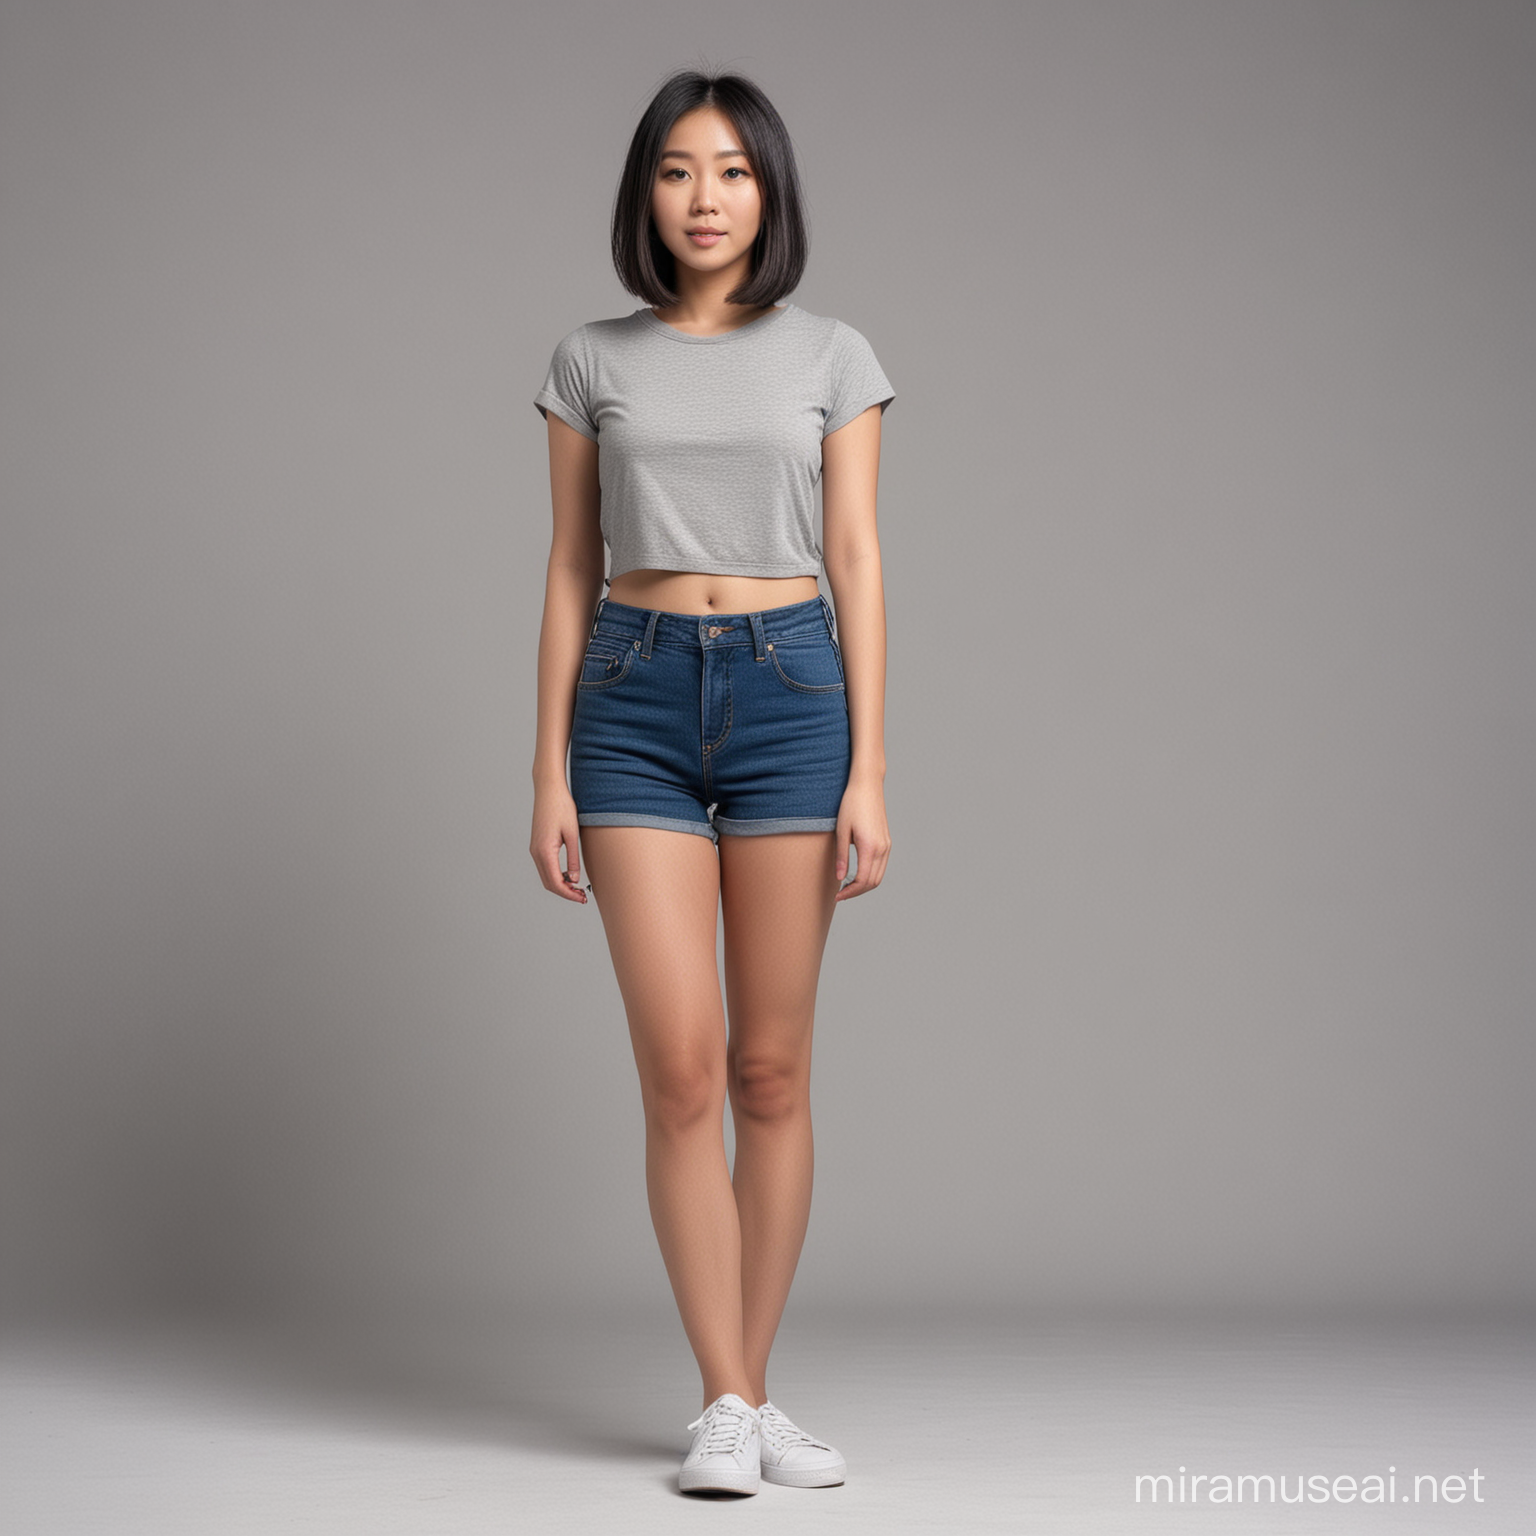 a full-body view of a slim beautiful Asian young adult woman with her hair in a bob standing alone 